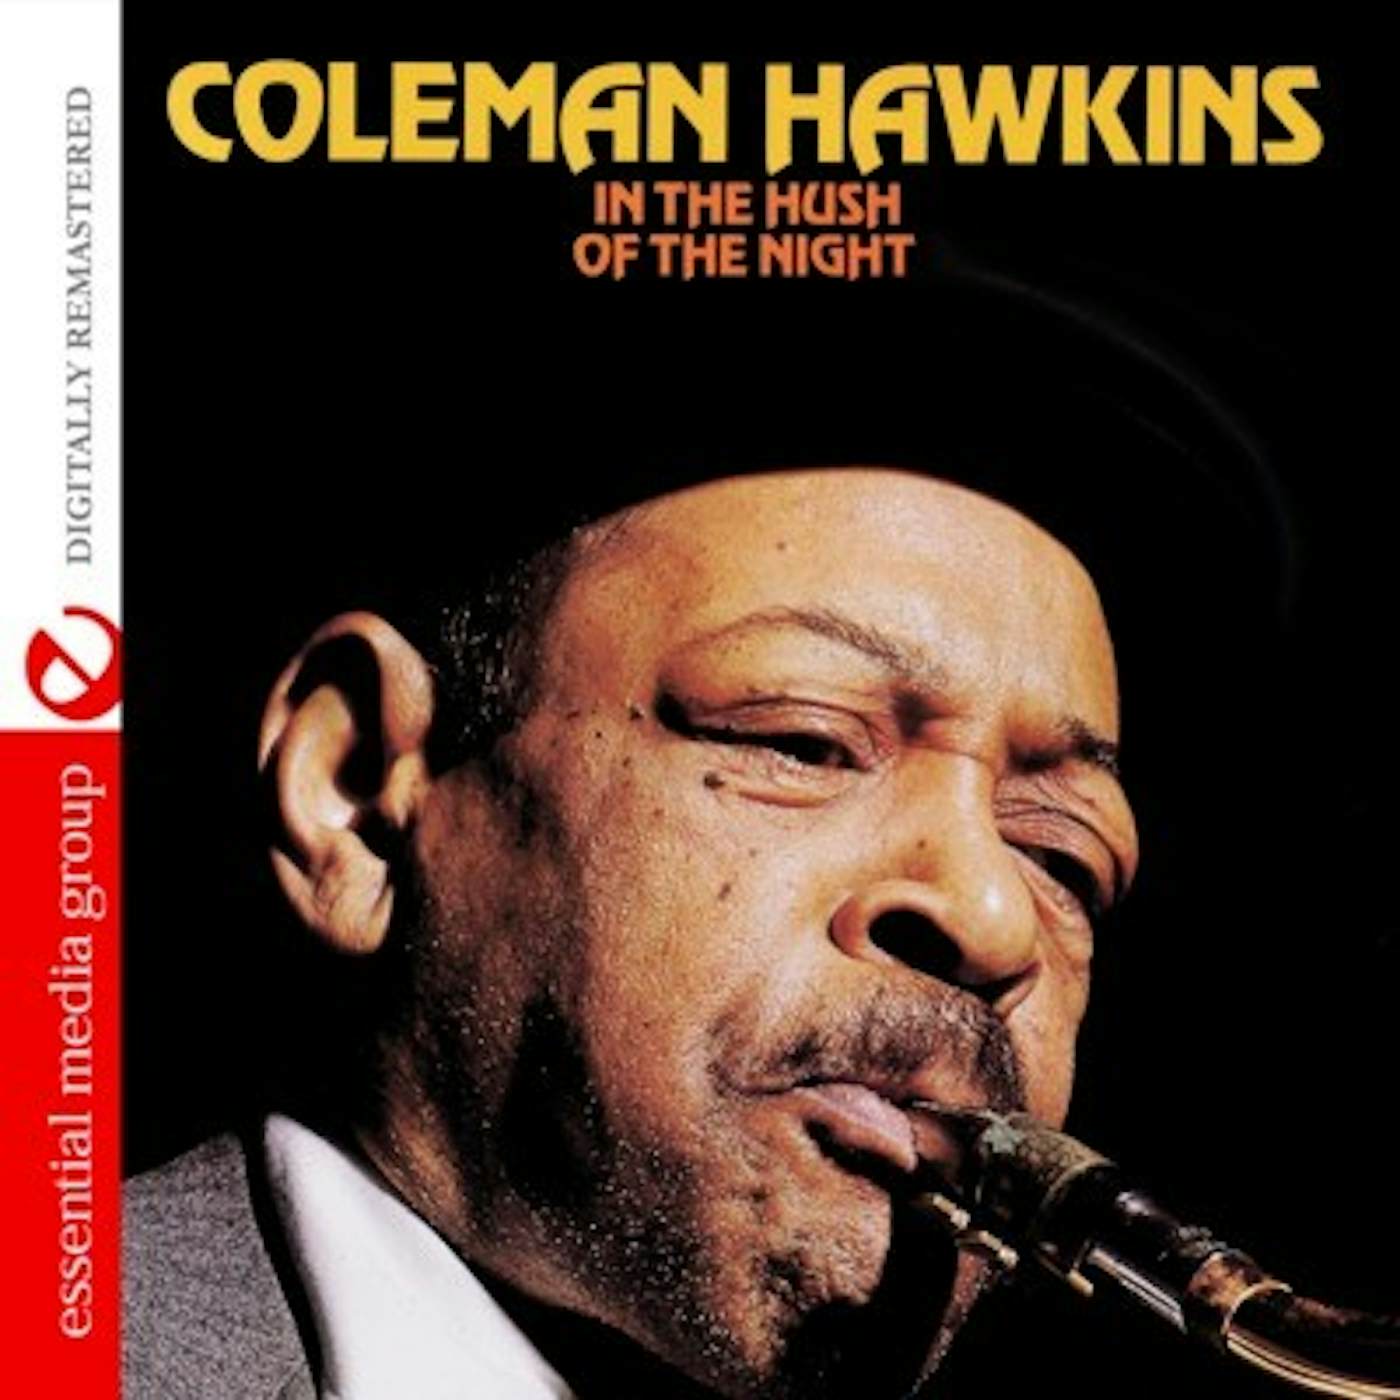 Coleman Hawkins IN THE HUSH OF THE NIGHT CD